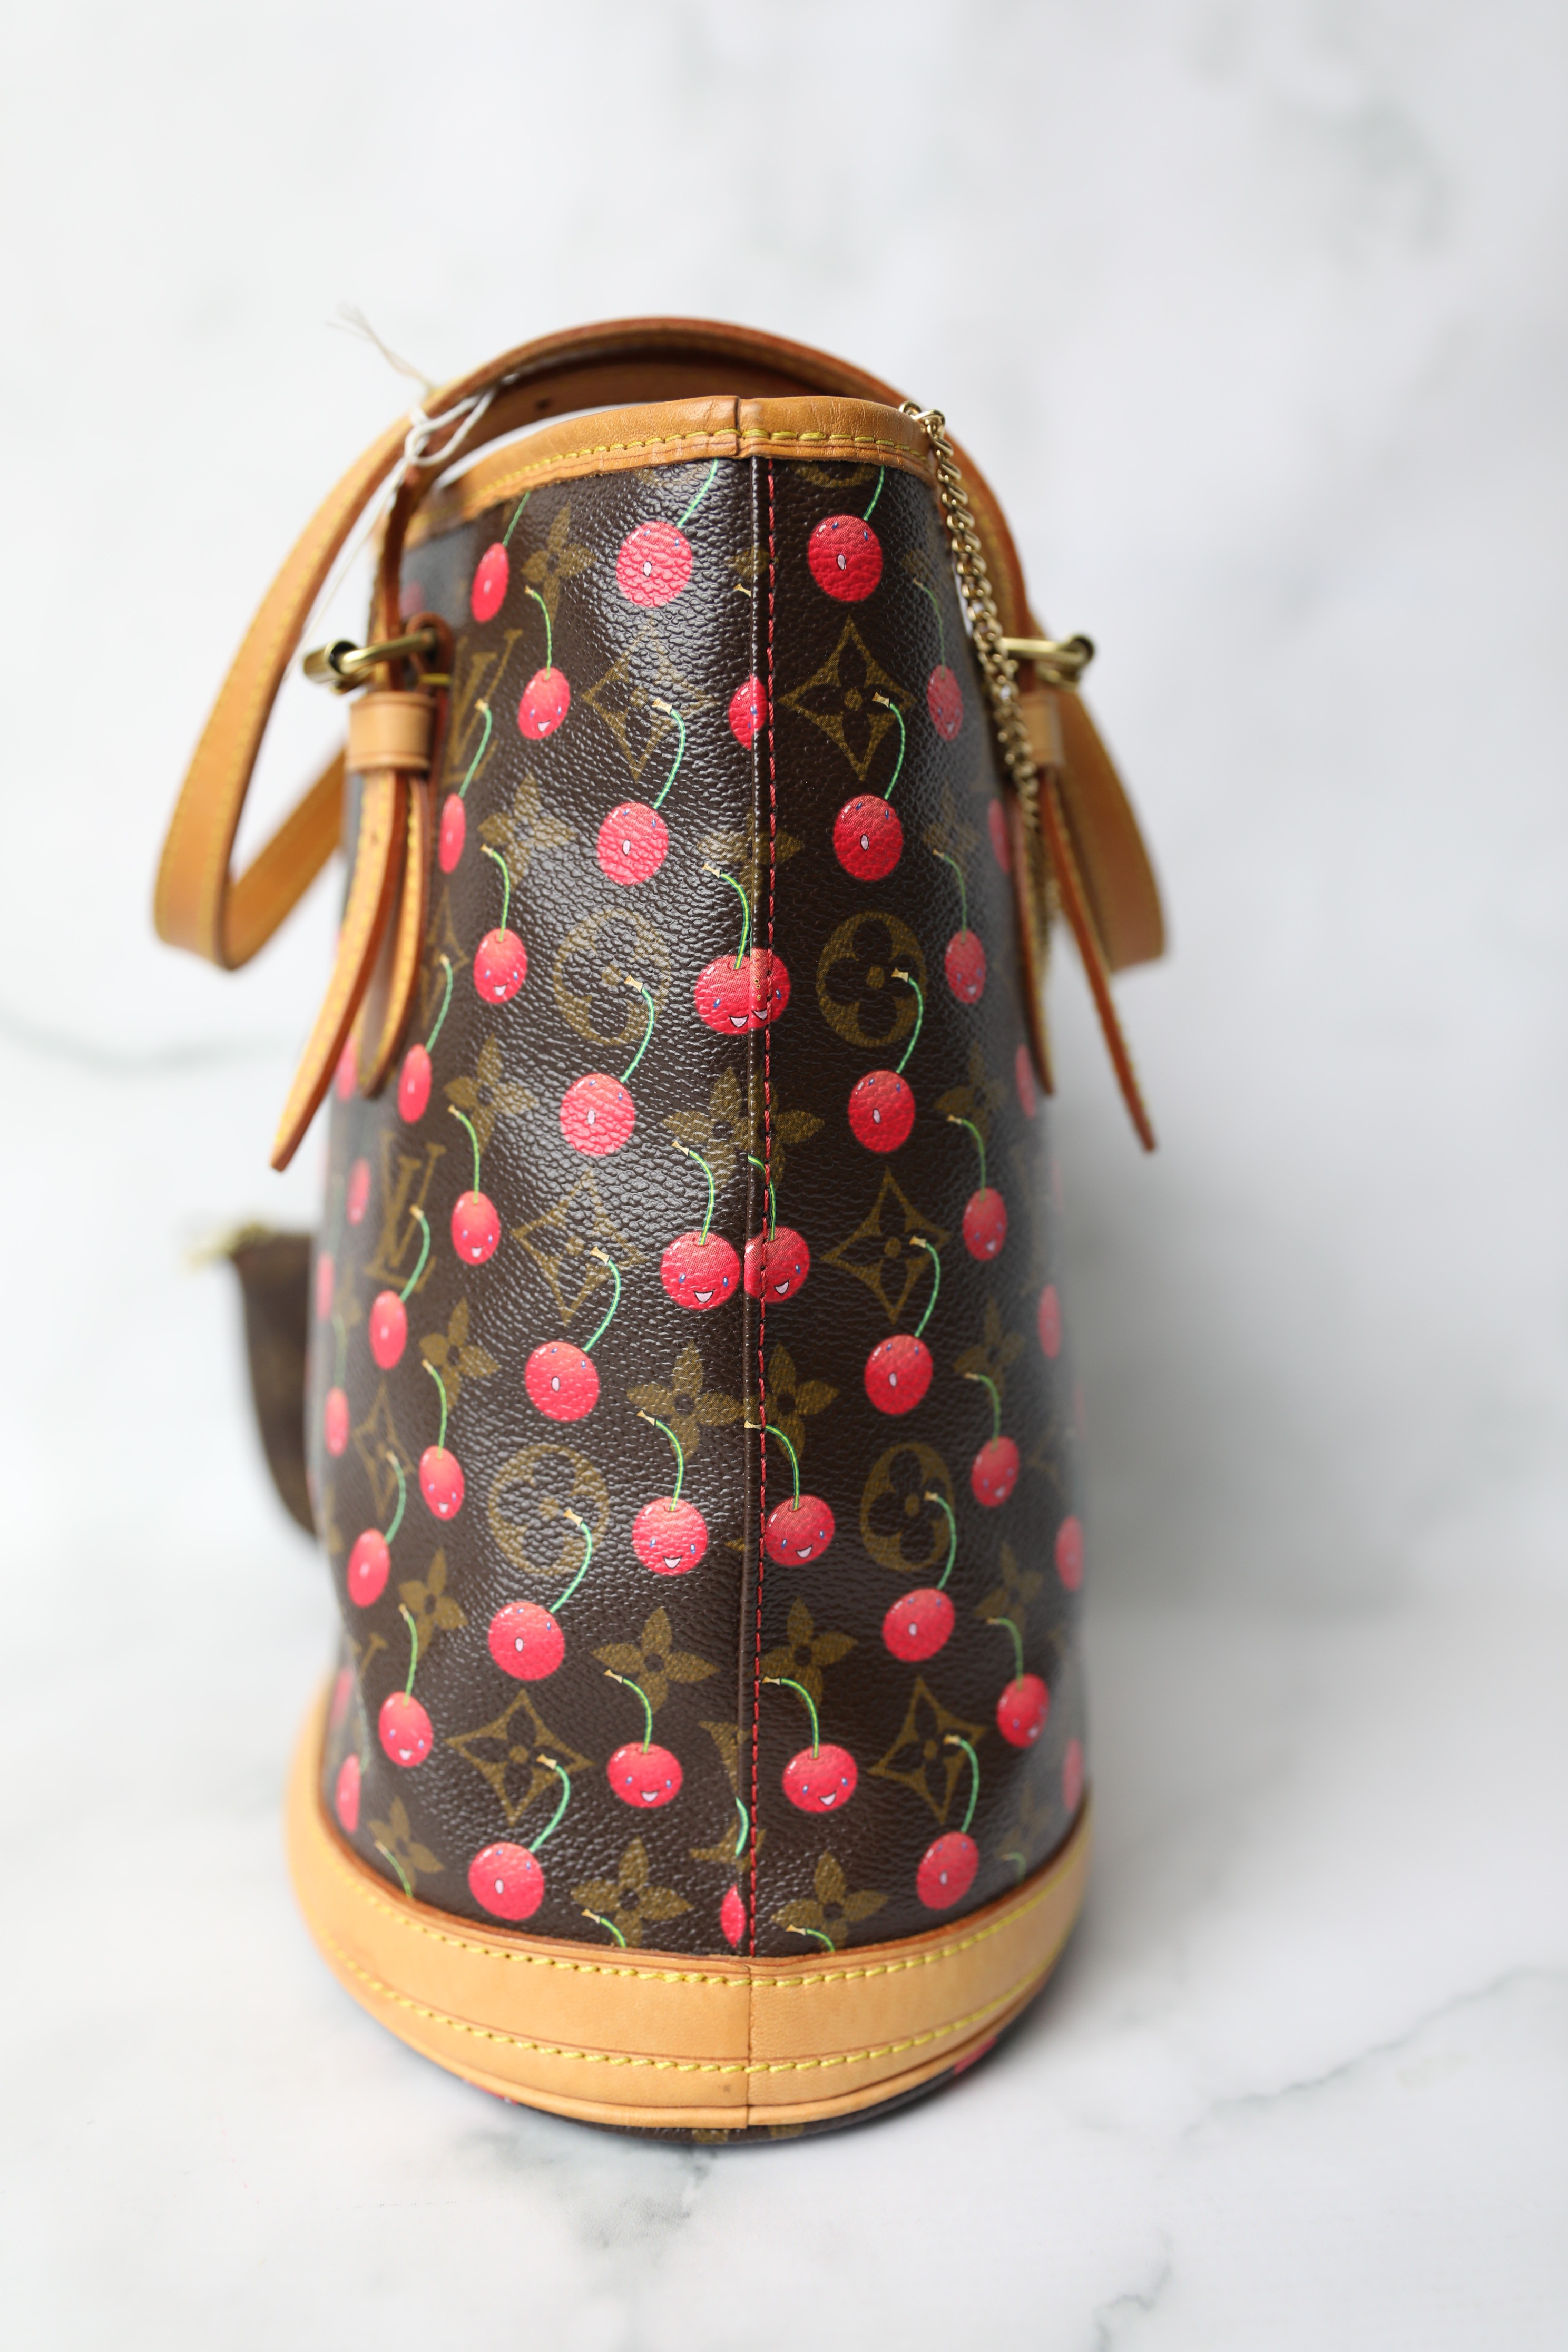 Louis Vuitton Cherry Cerises Bucket Bag, Preowned in Dustbag